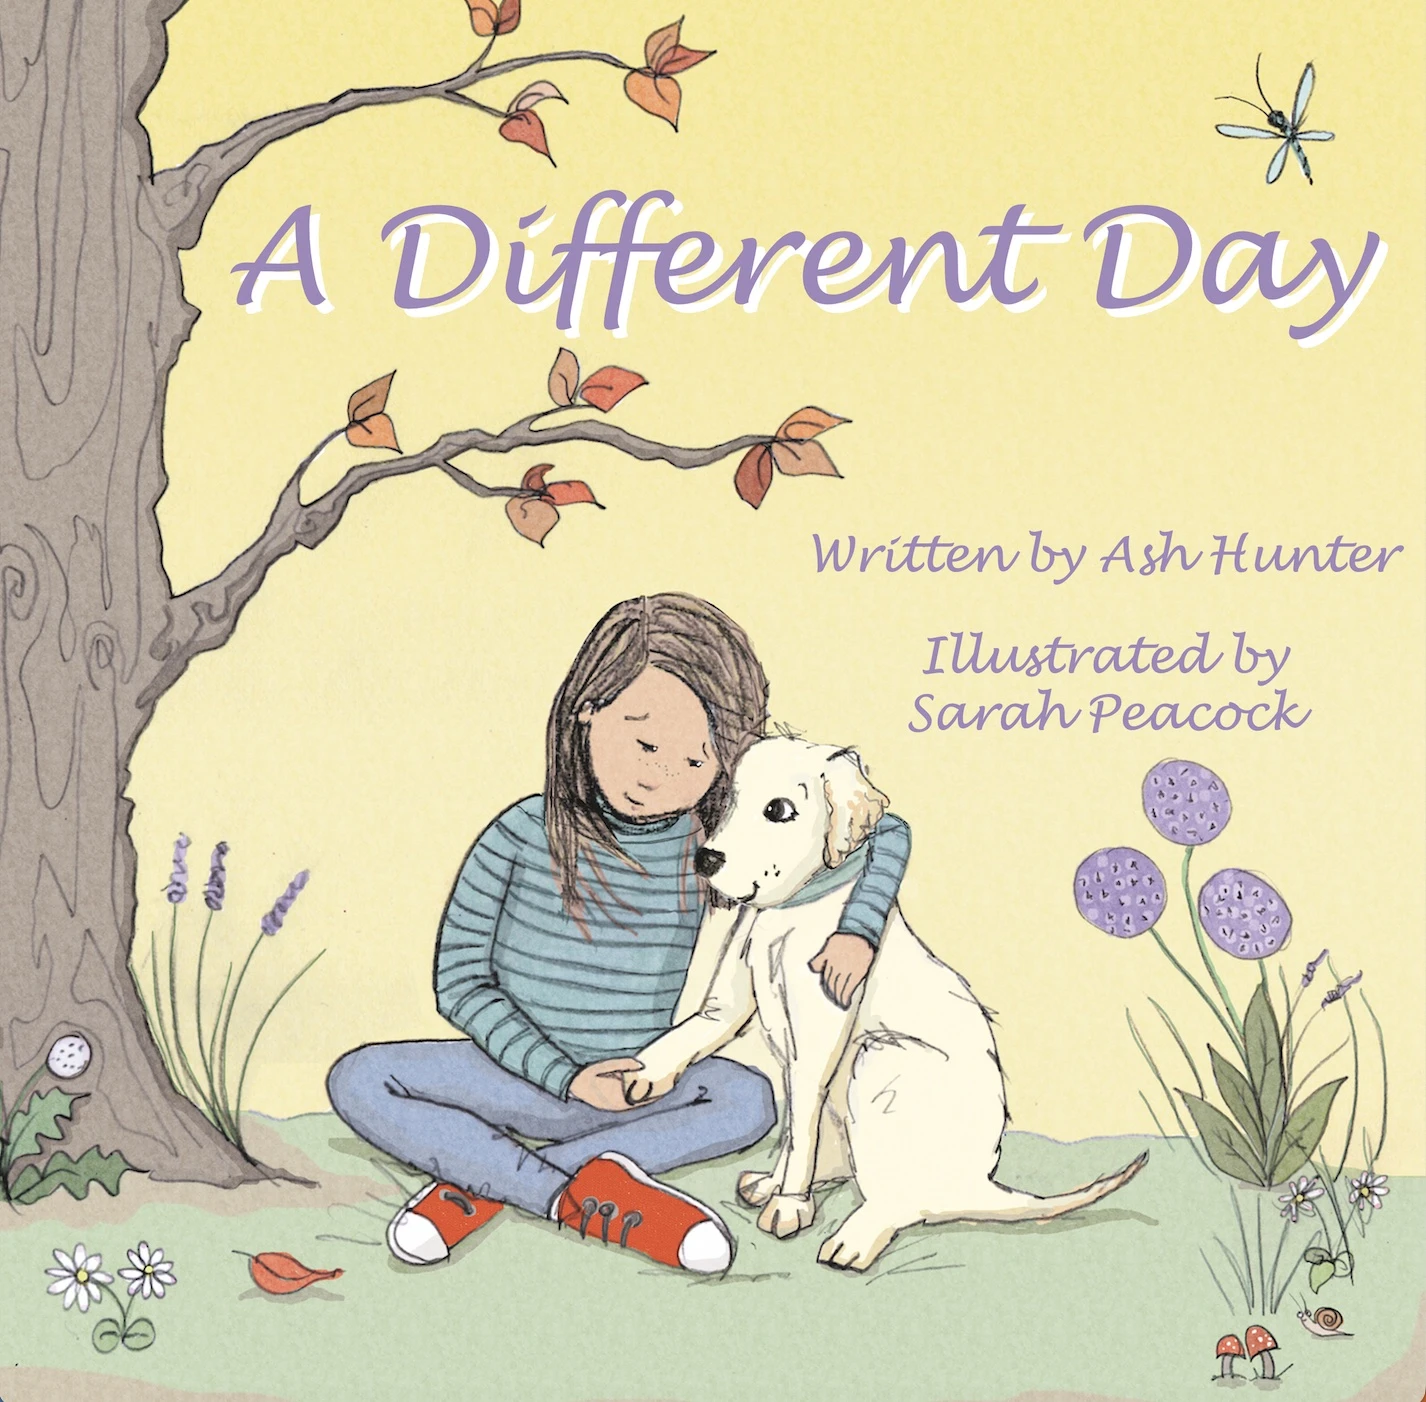 A Different Day: A tale of friendship and strength in the hardest of times